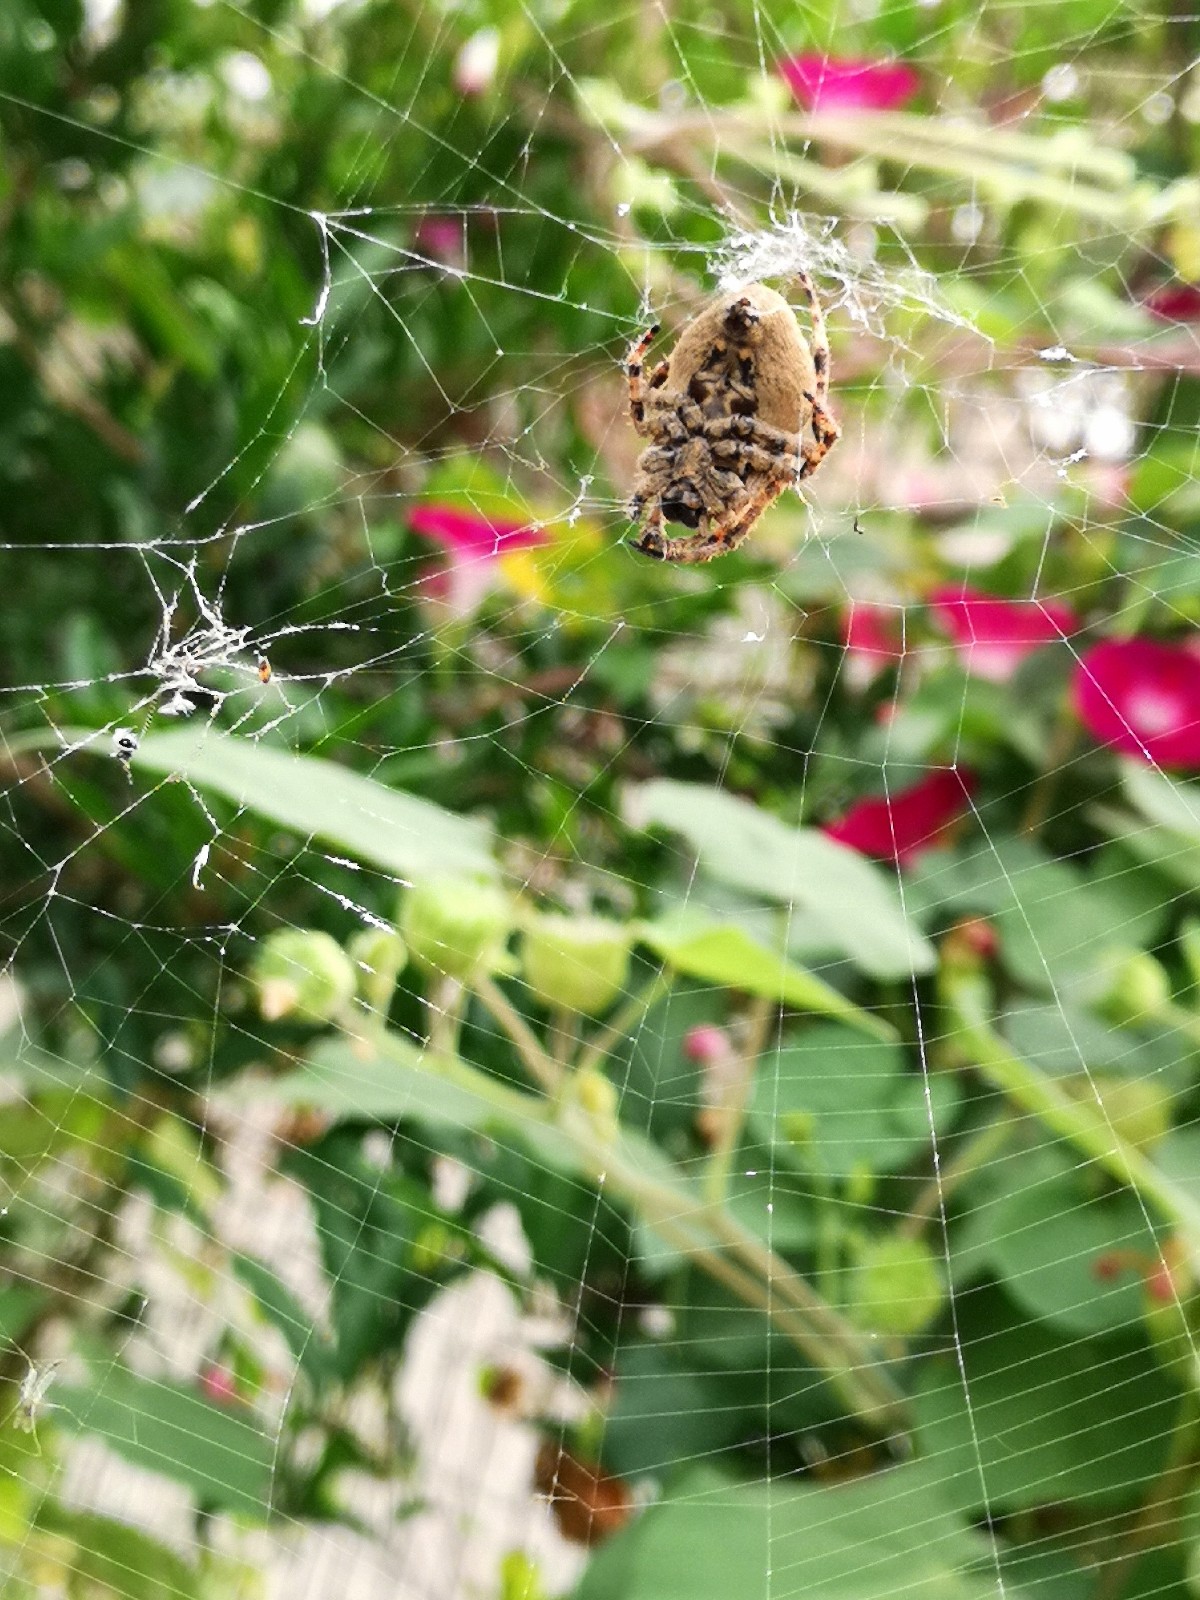 Spider Eating Insect